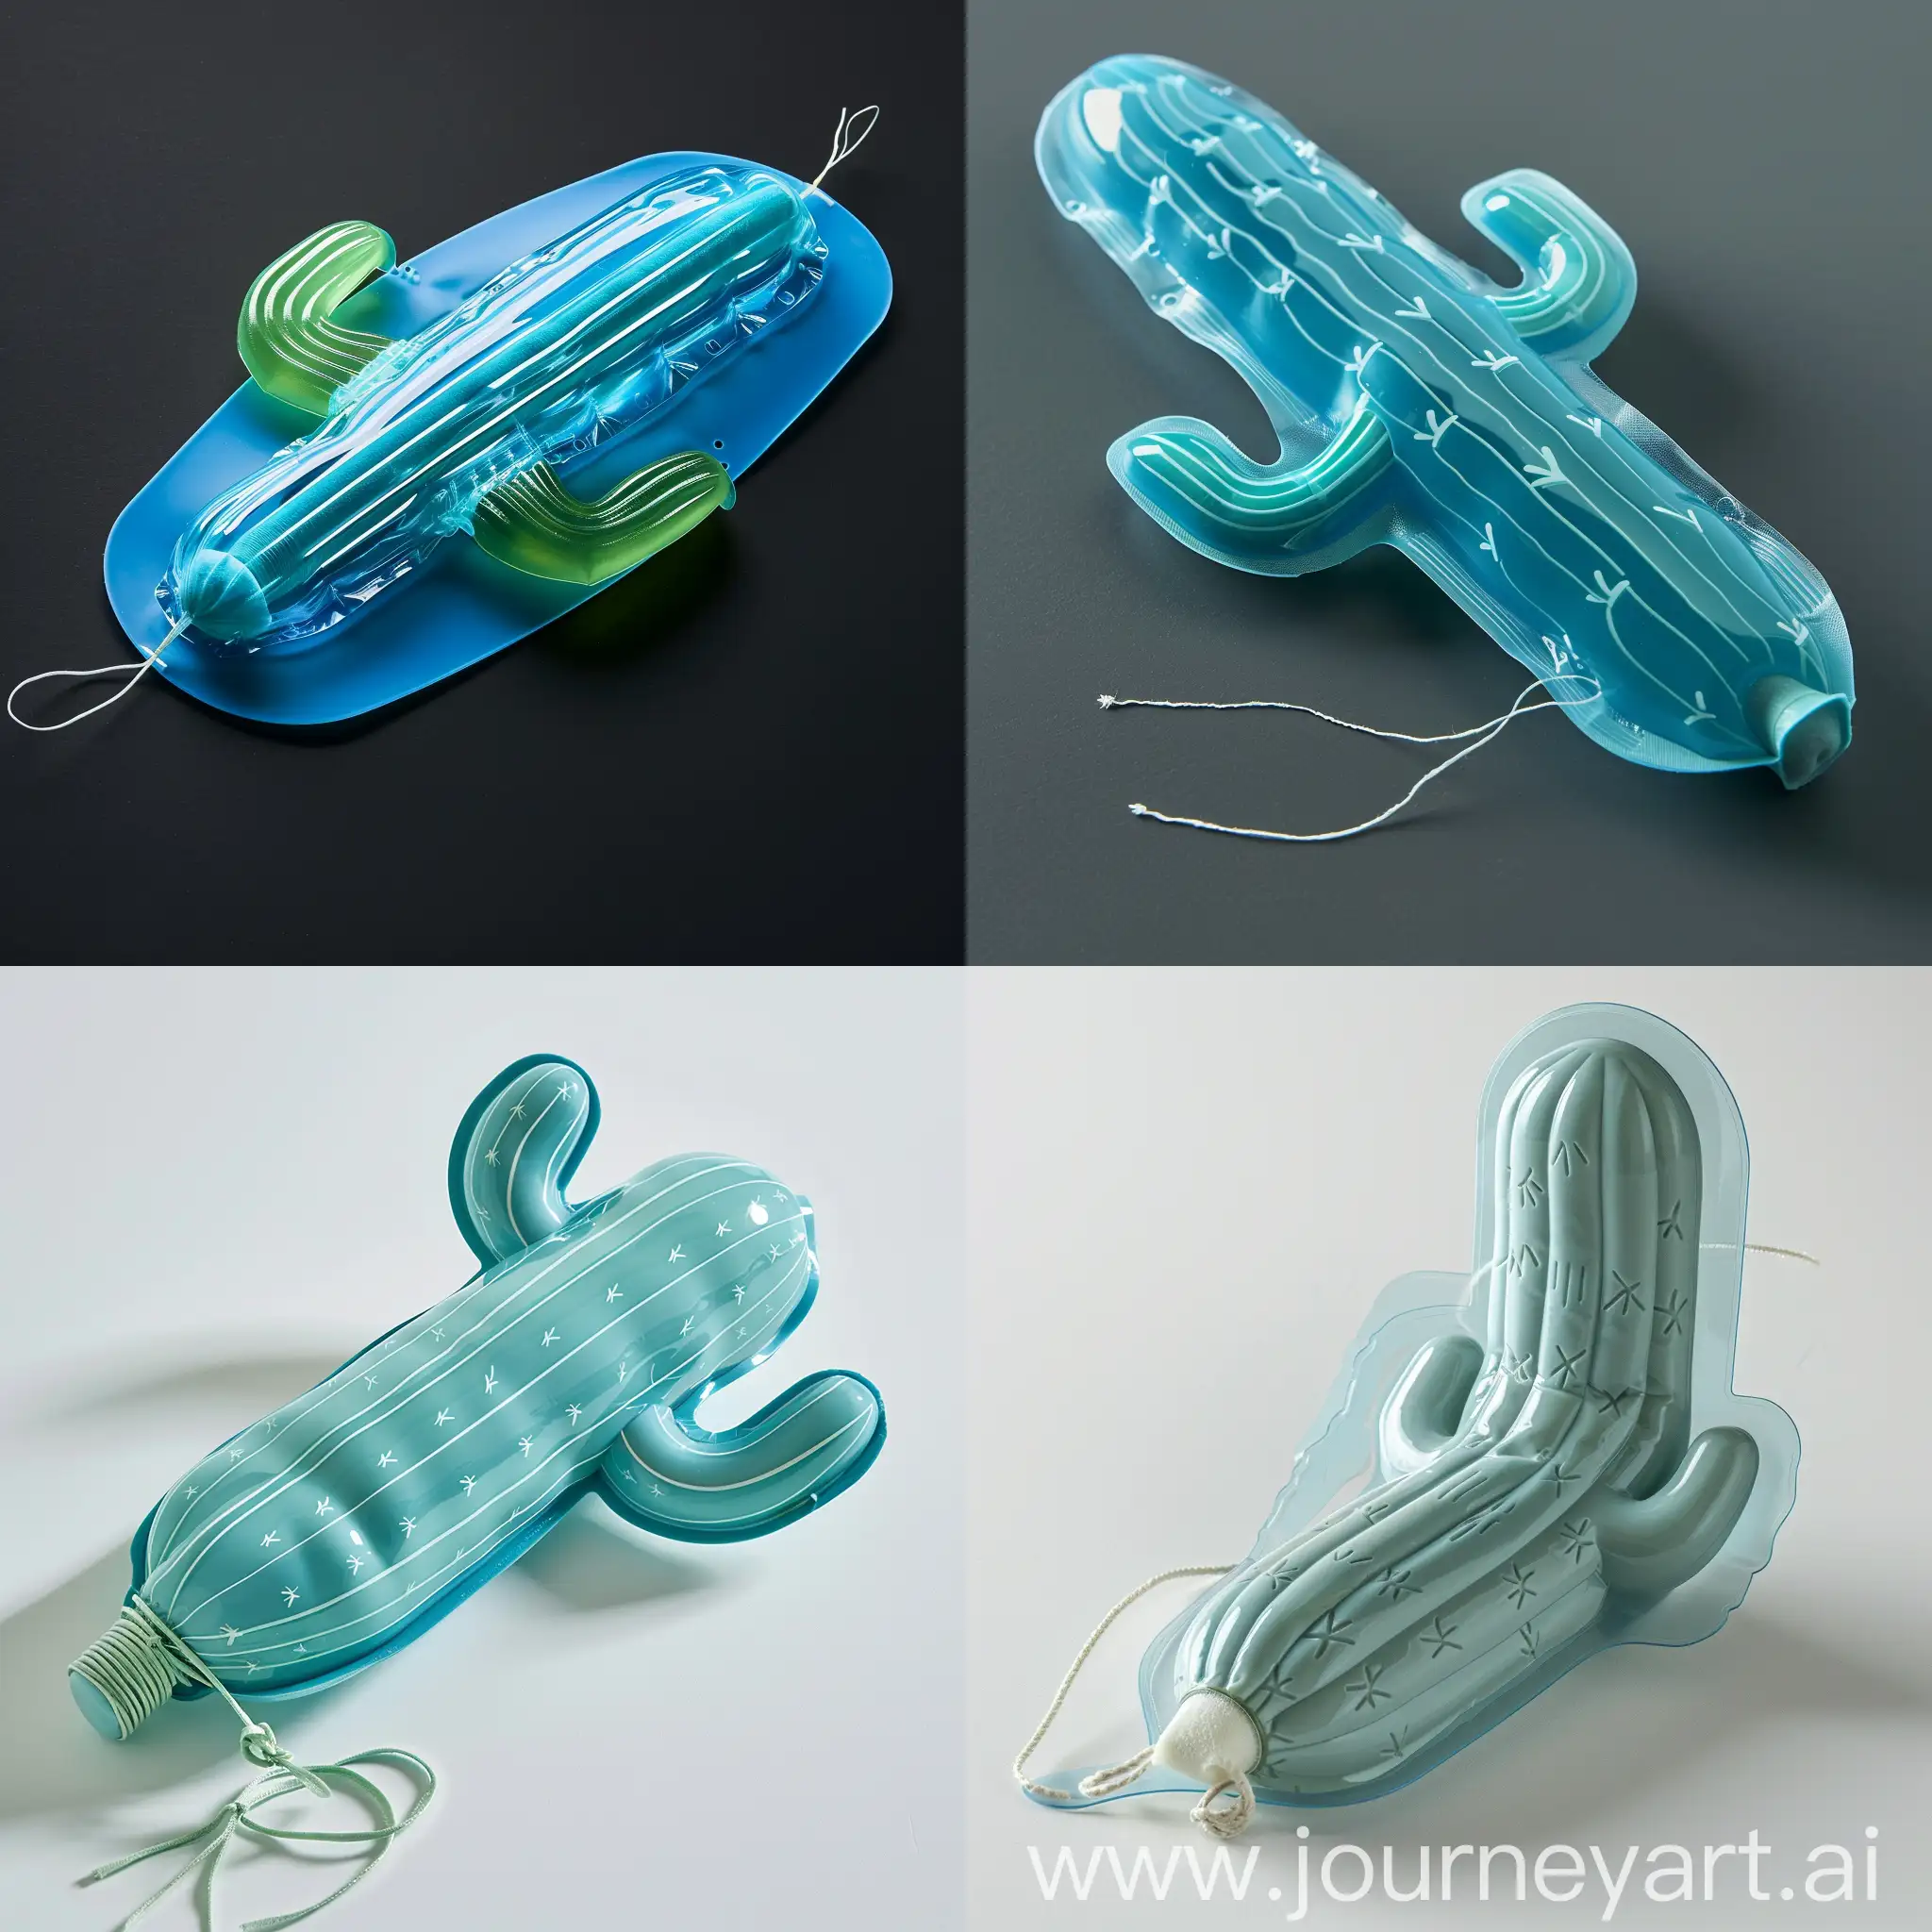 a tampon product in the shape of a cactus, in a blue plastic cover, laying down on its side, with a string coming out of the bottom of the cactus